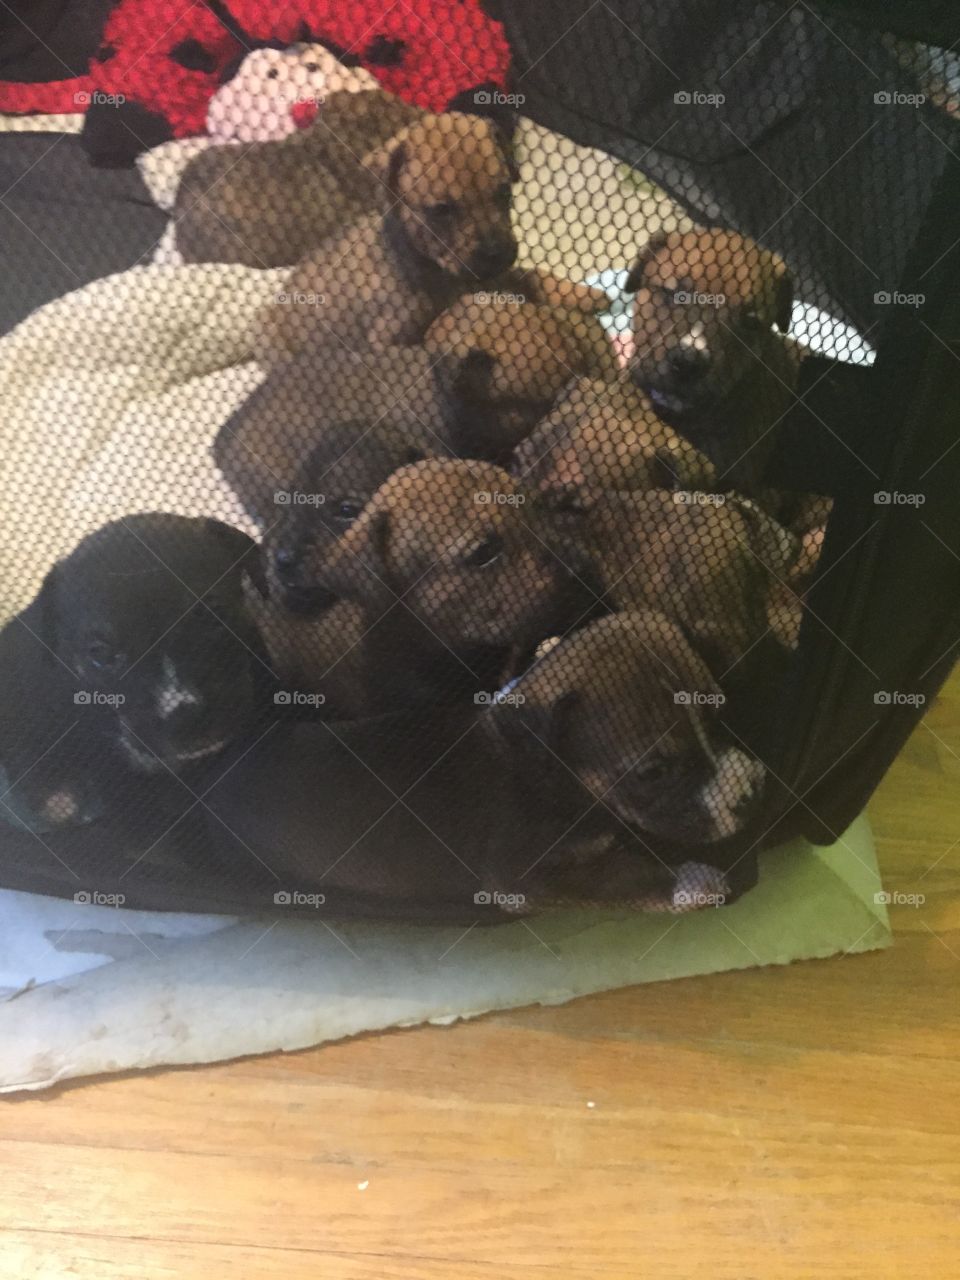 Puppies in a play pen. These are my foster puppies. I put them in their play pen so I could clean up and they were not happy